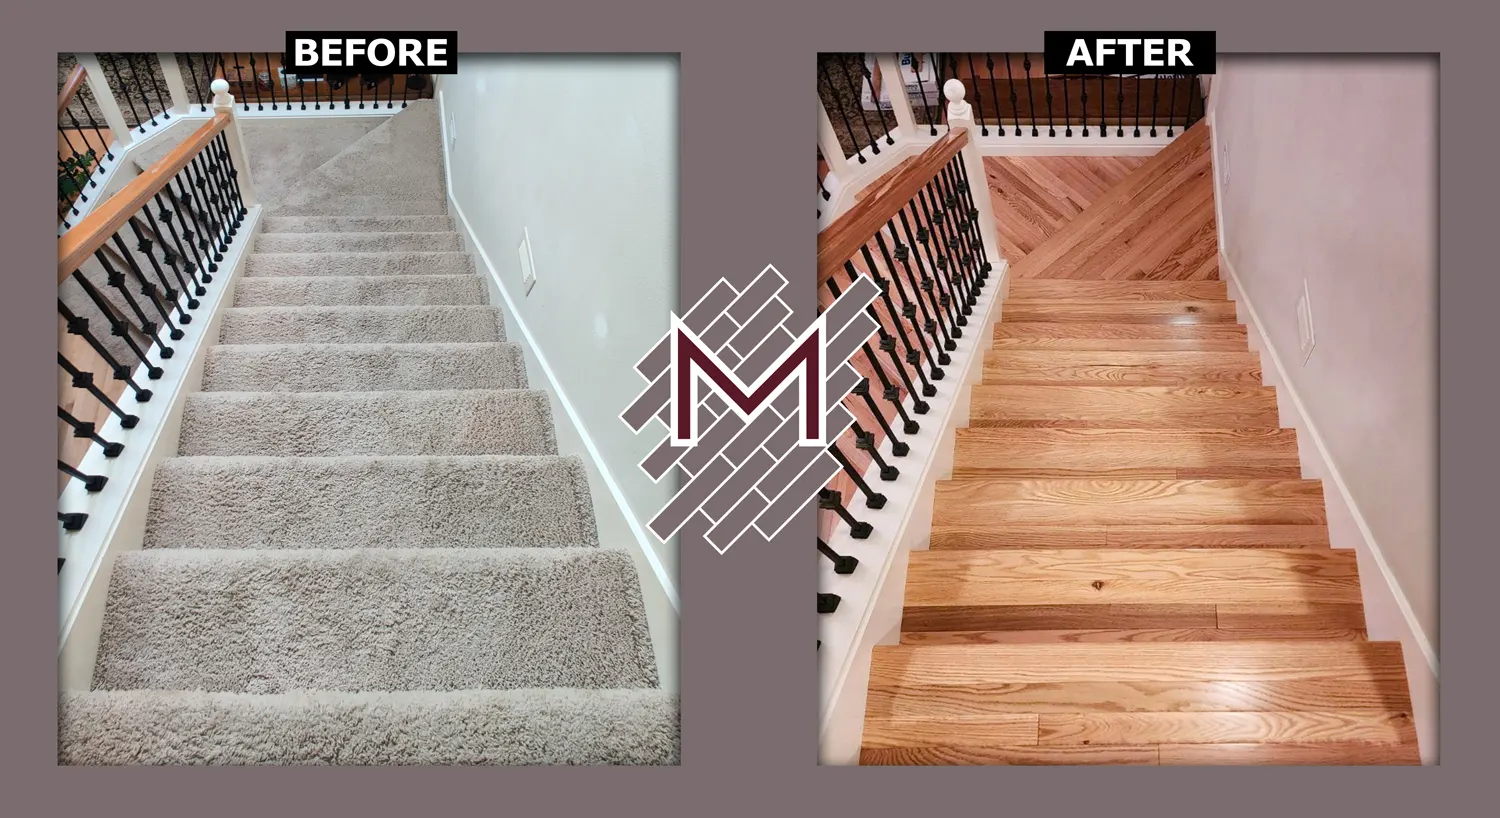 Before and after picture showing the old carpet stairs and the new red oak stairs installed. New flooring installation by Modern Flooring Services